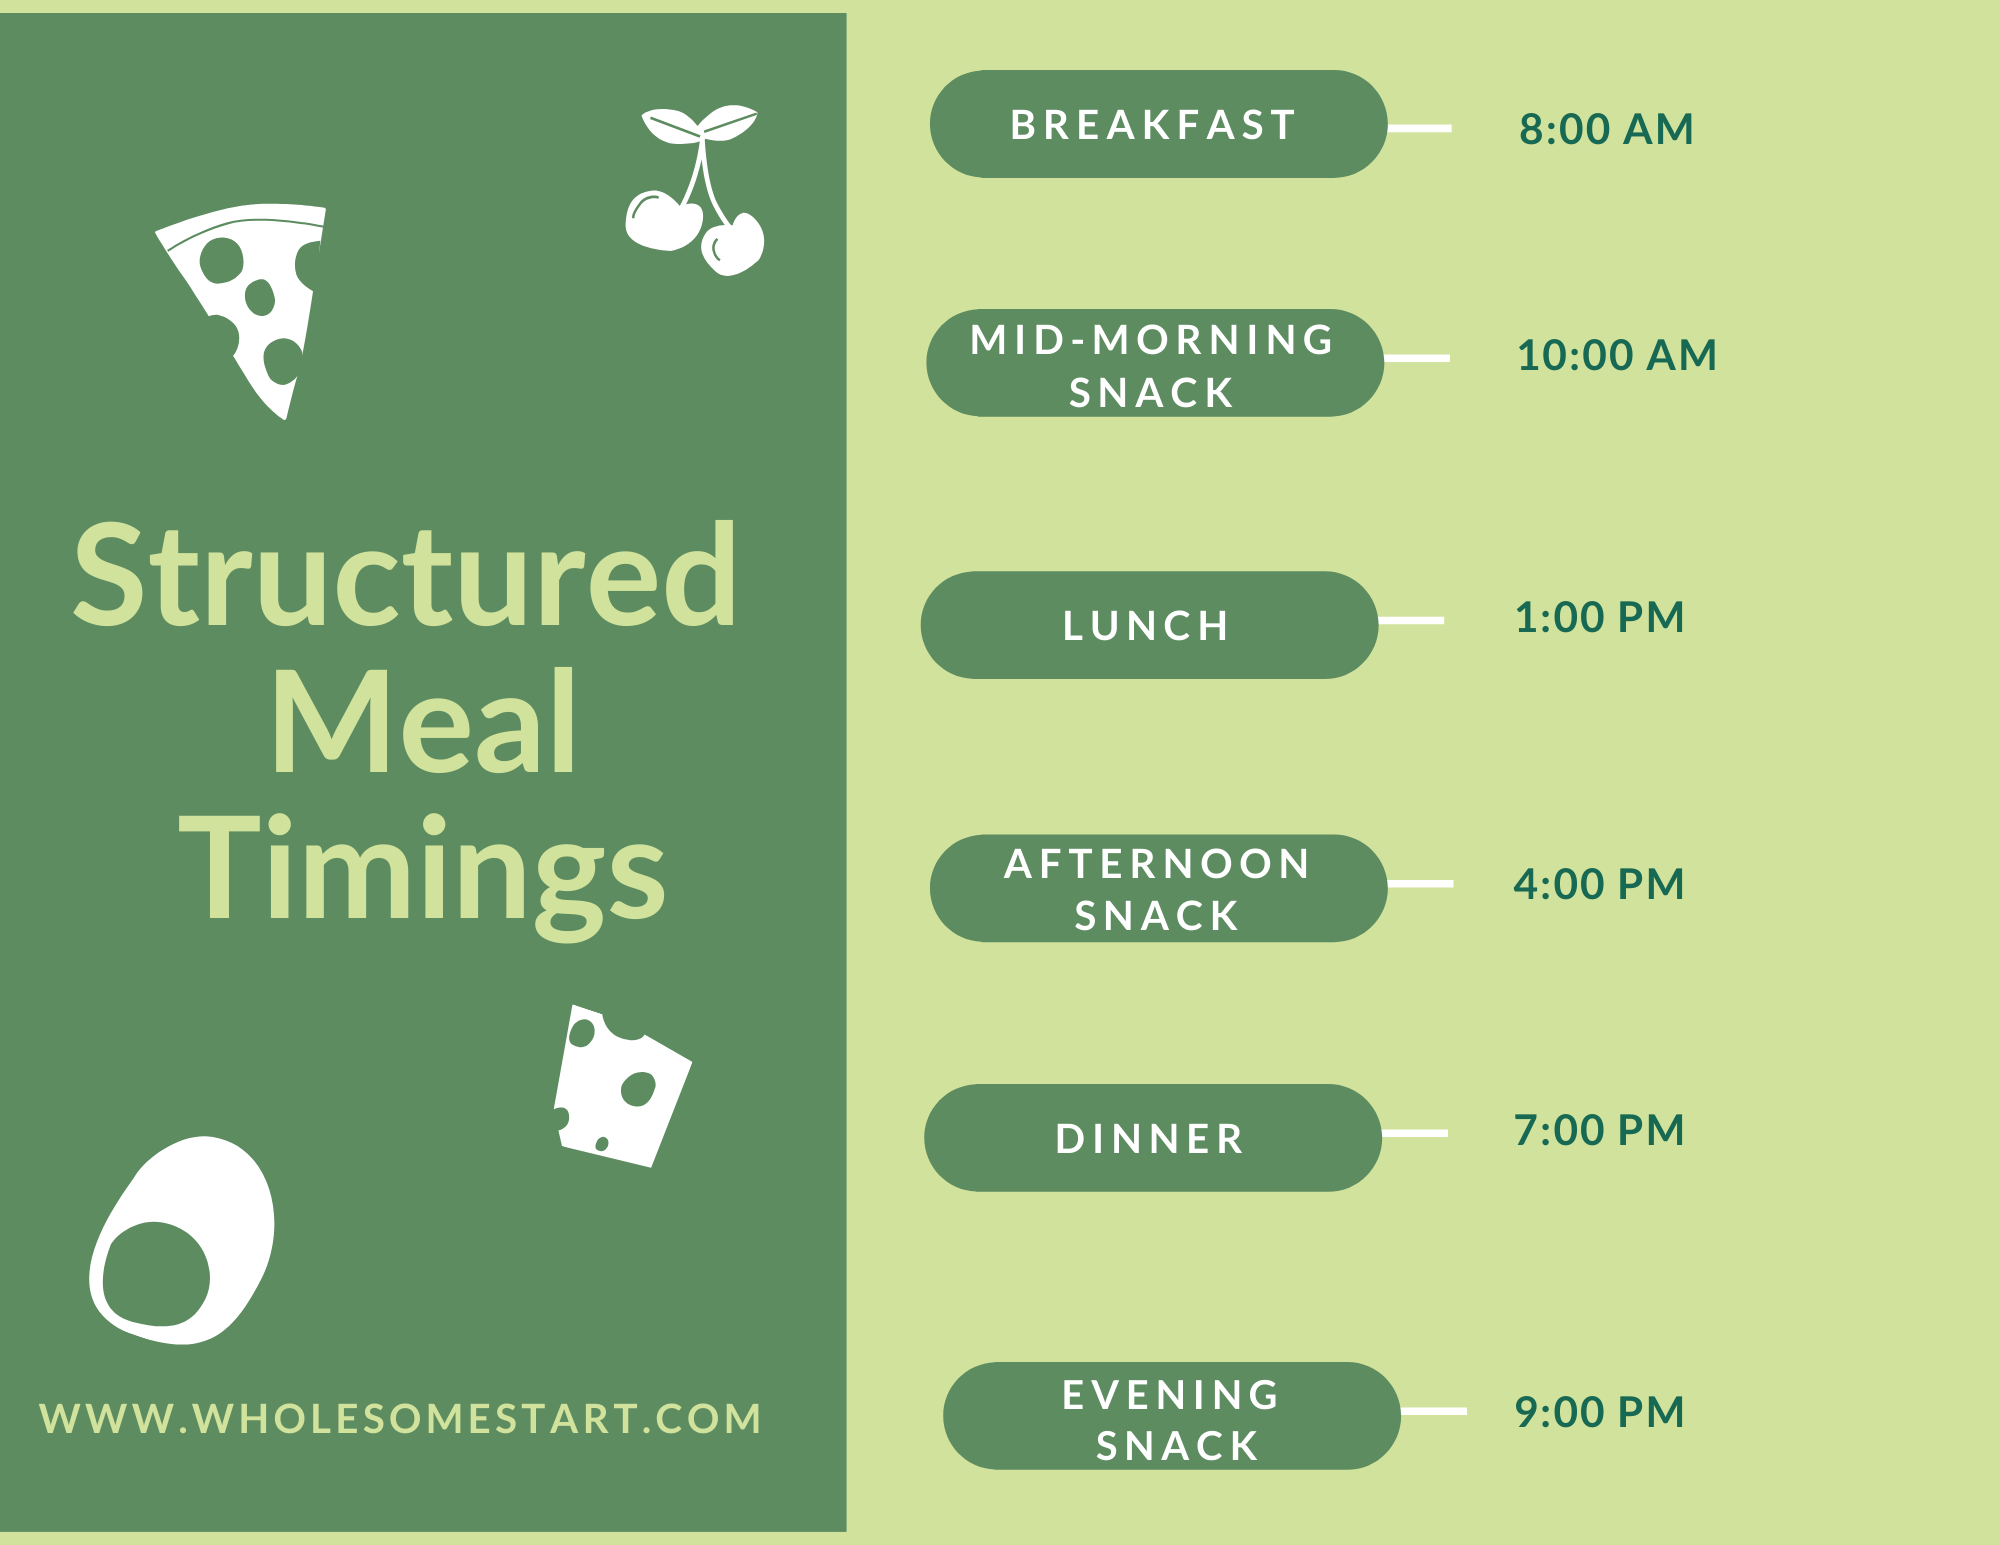 Structured meal timing